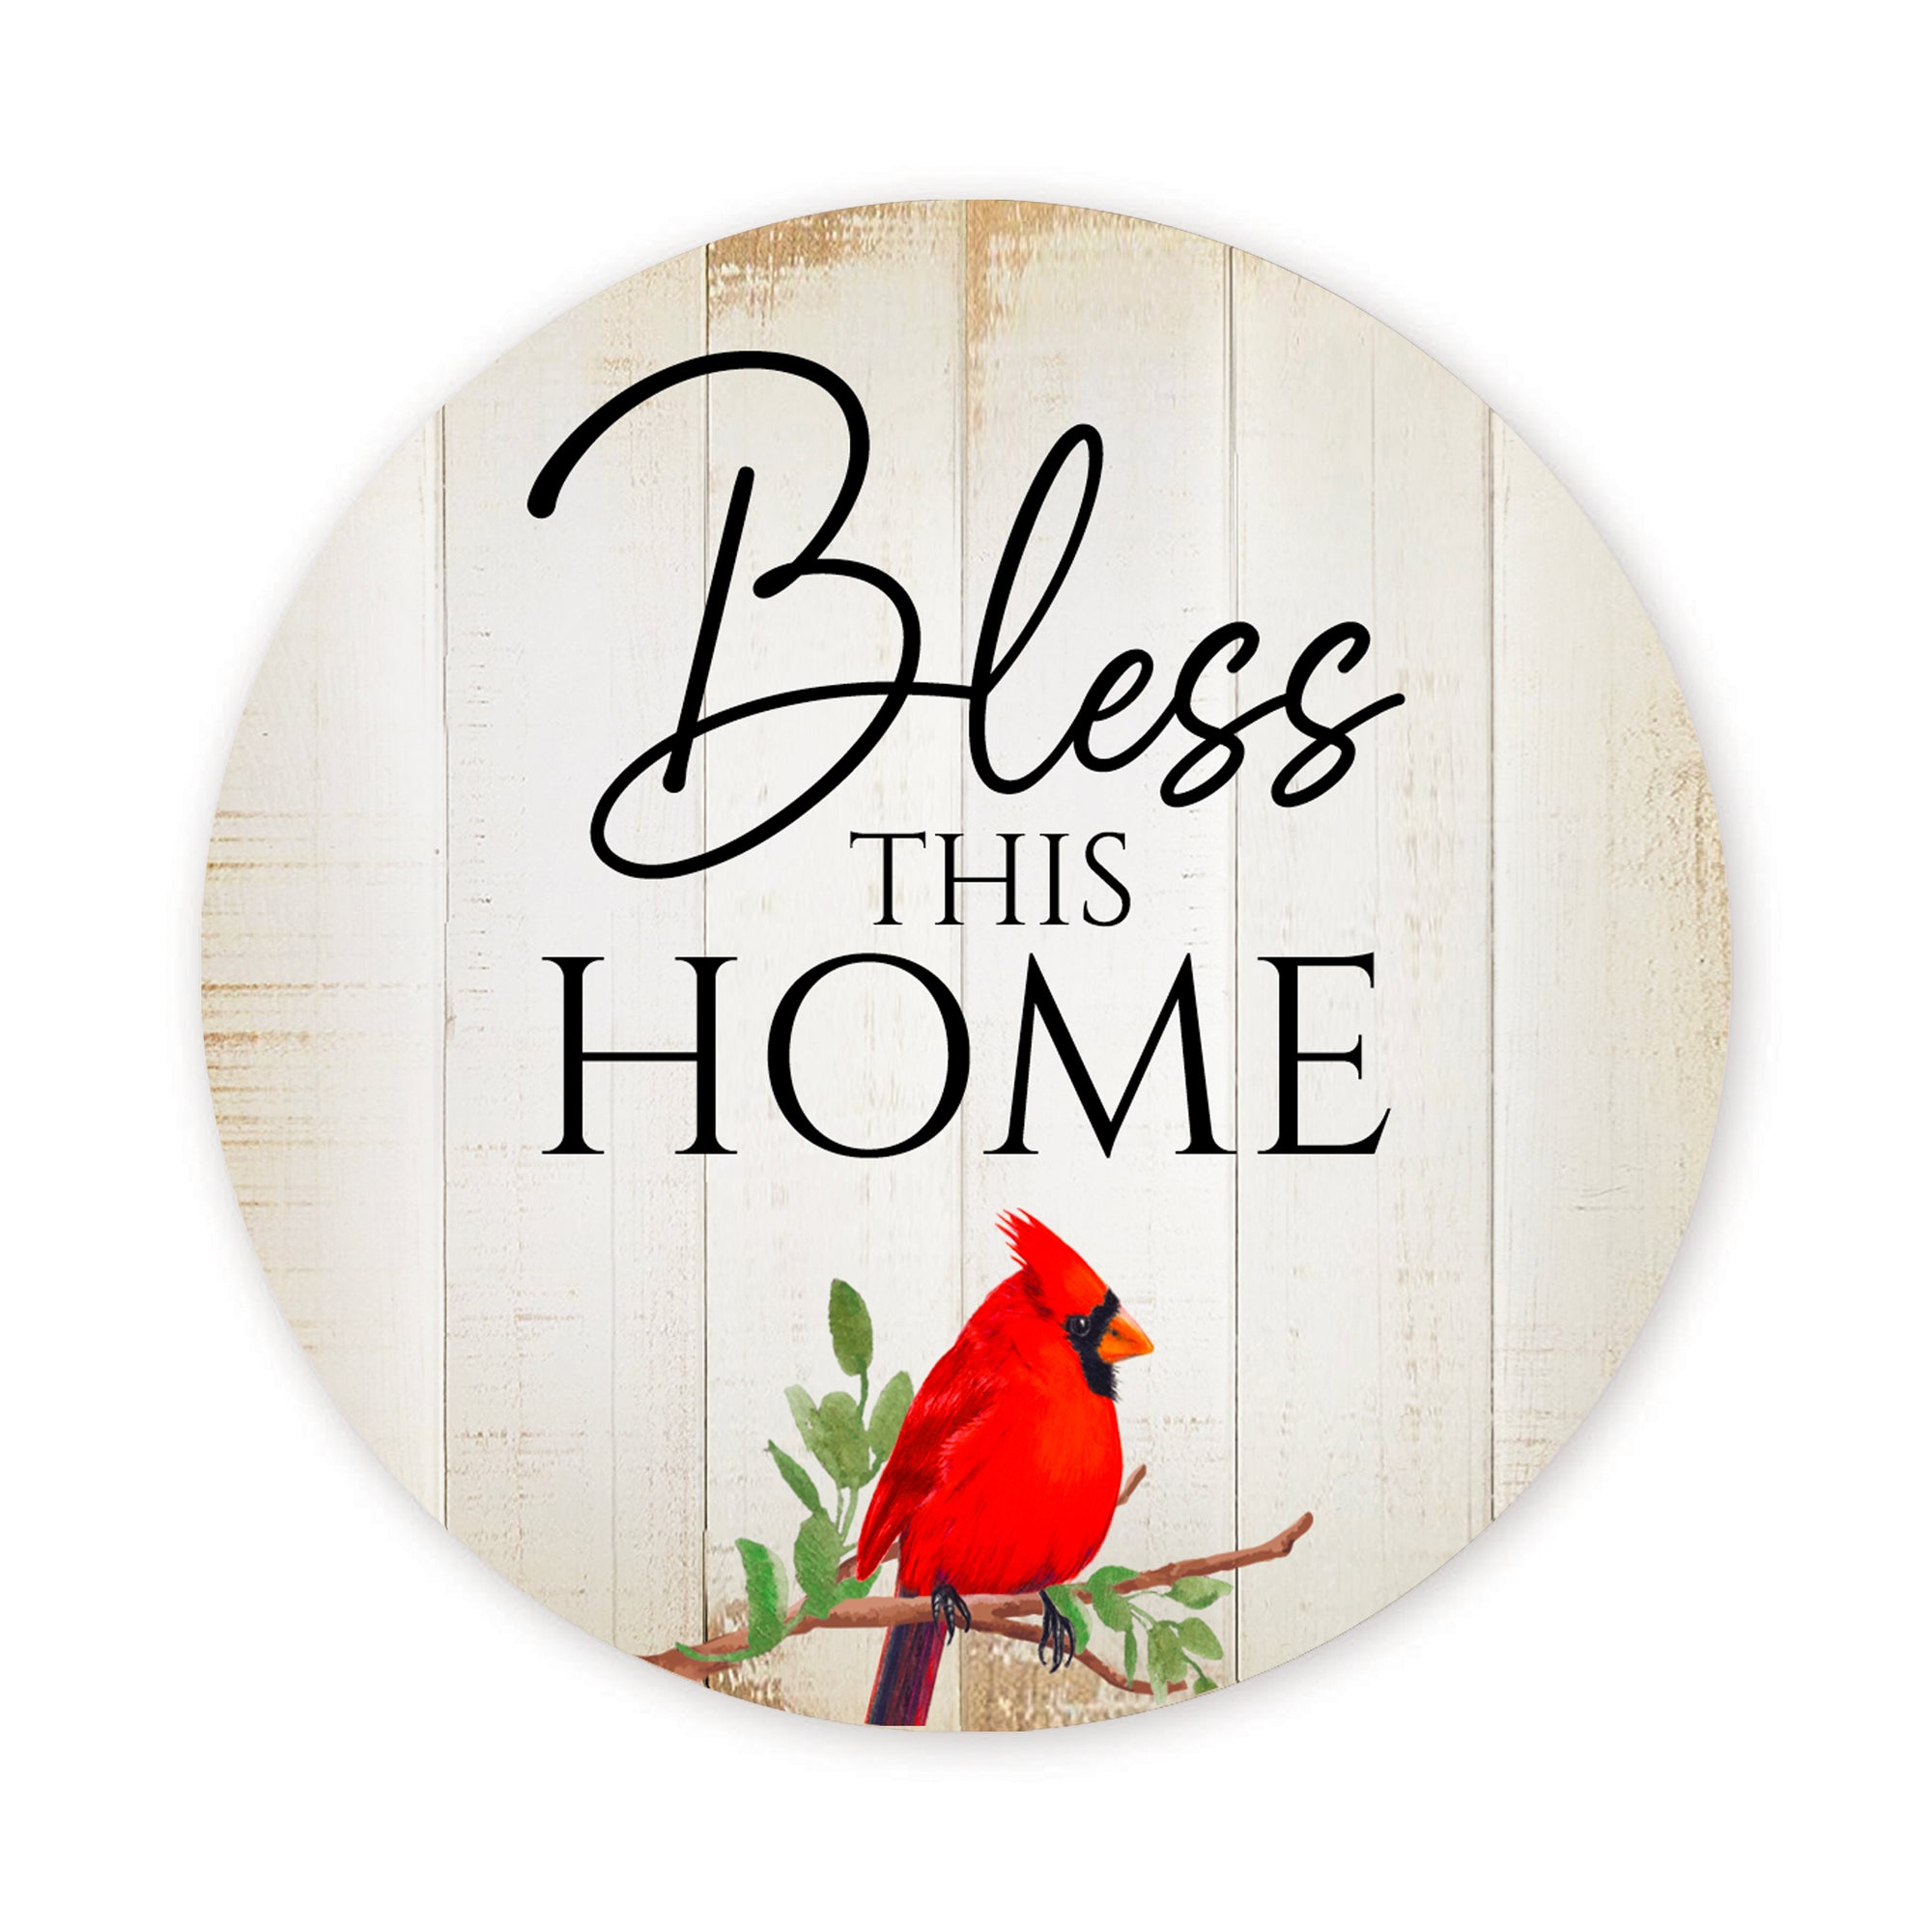 Vintage-Inspired Cardinal Wooden Magnet Printed With Everyday Inspirational Verses Gift Ideas